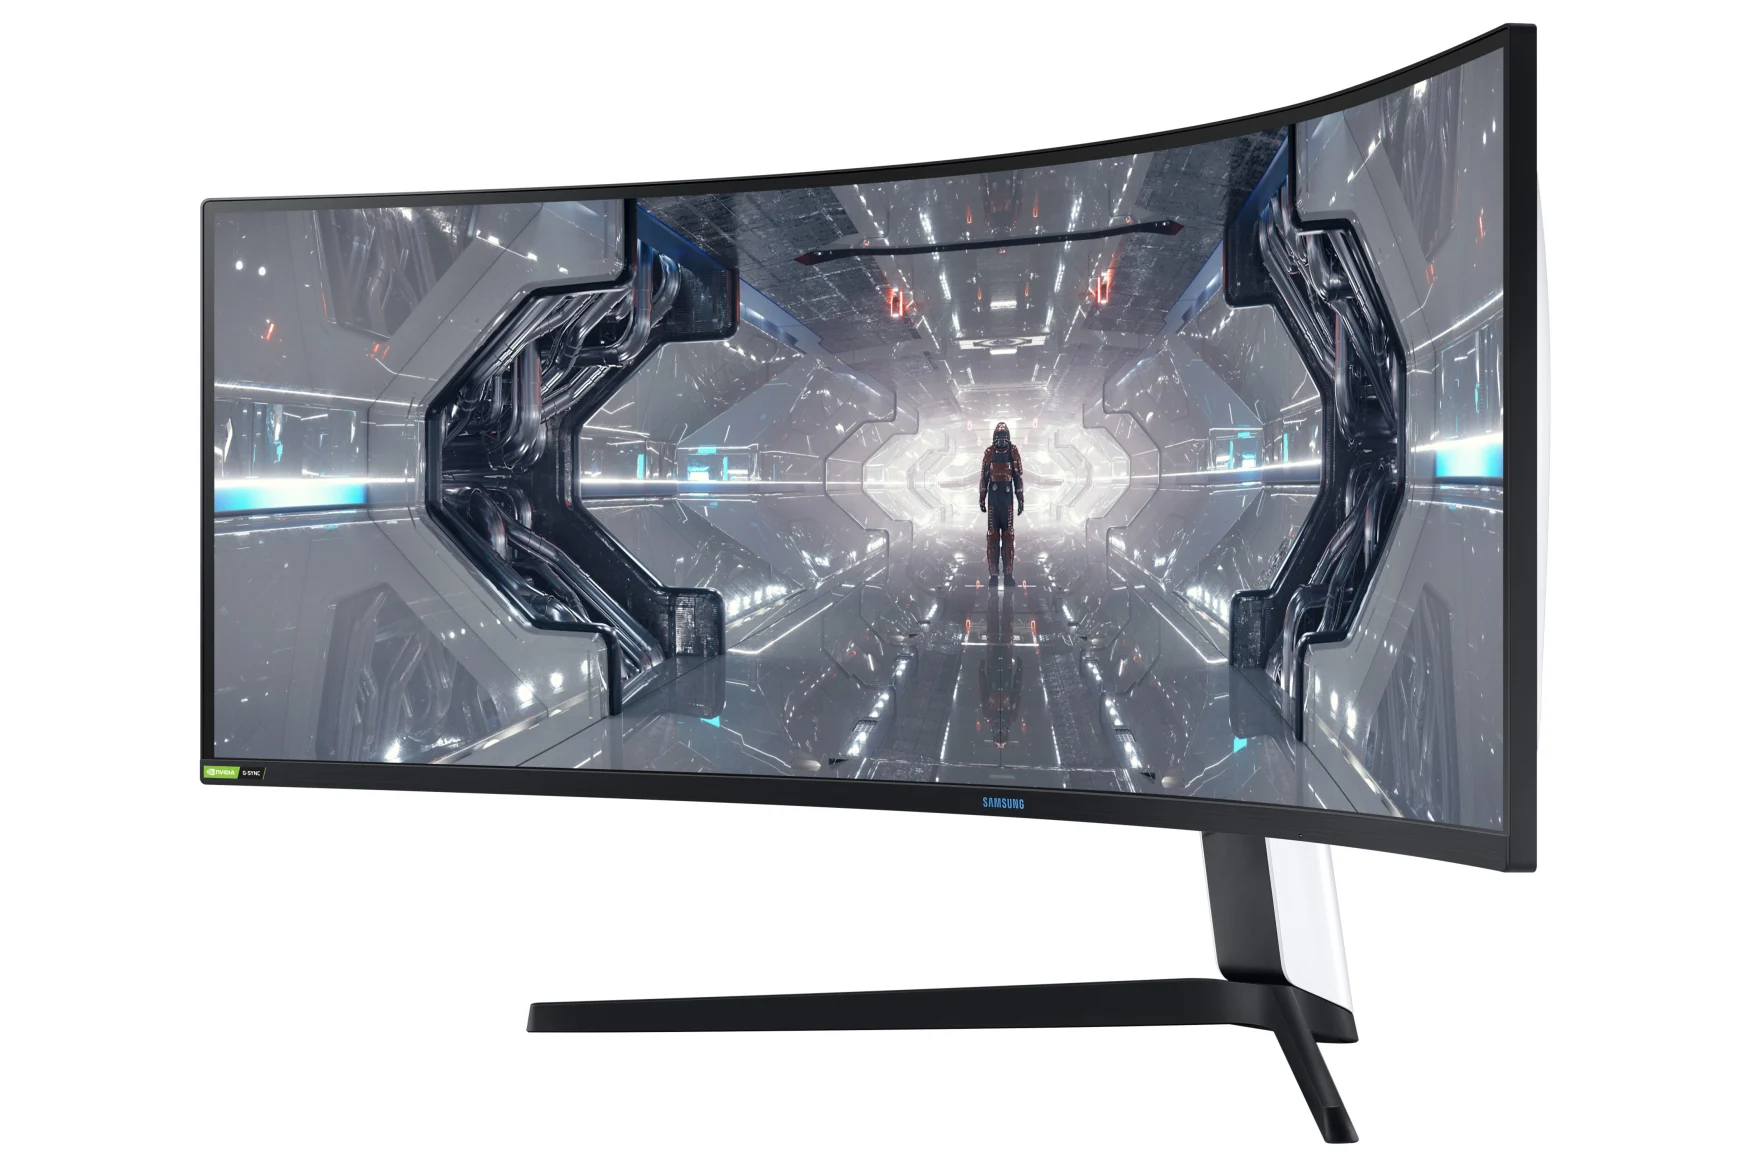 Samsung Odyssey G9 curved gaming monitor